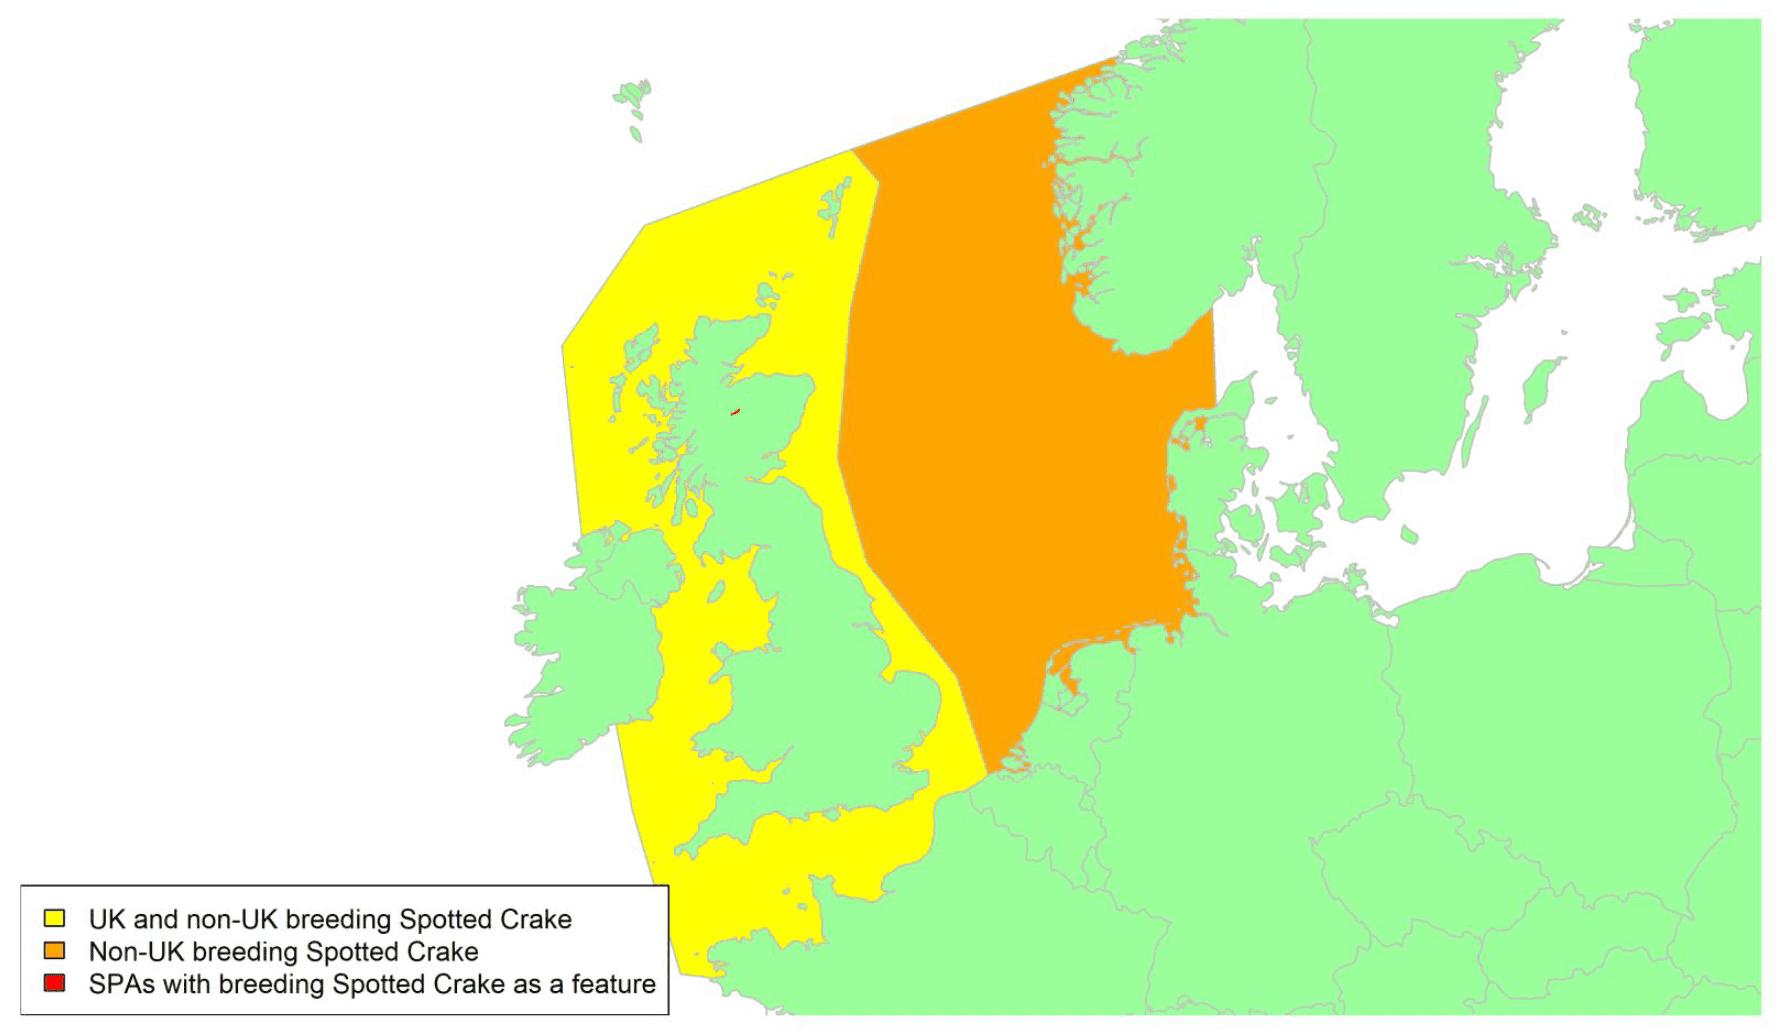 Map of North West Europe showing migratory routes and SPAs within the UK for Spotted Crake as described in the text below.